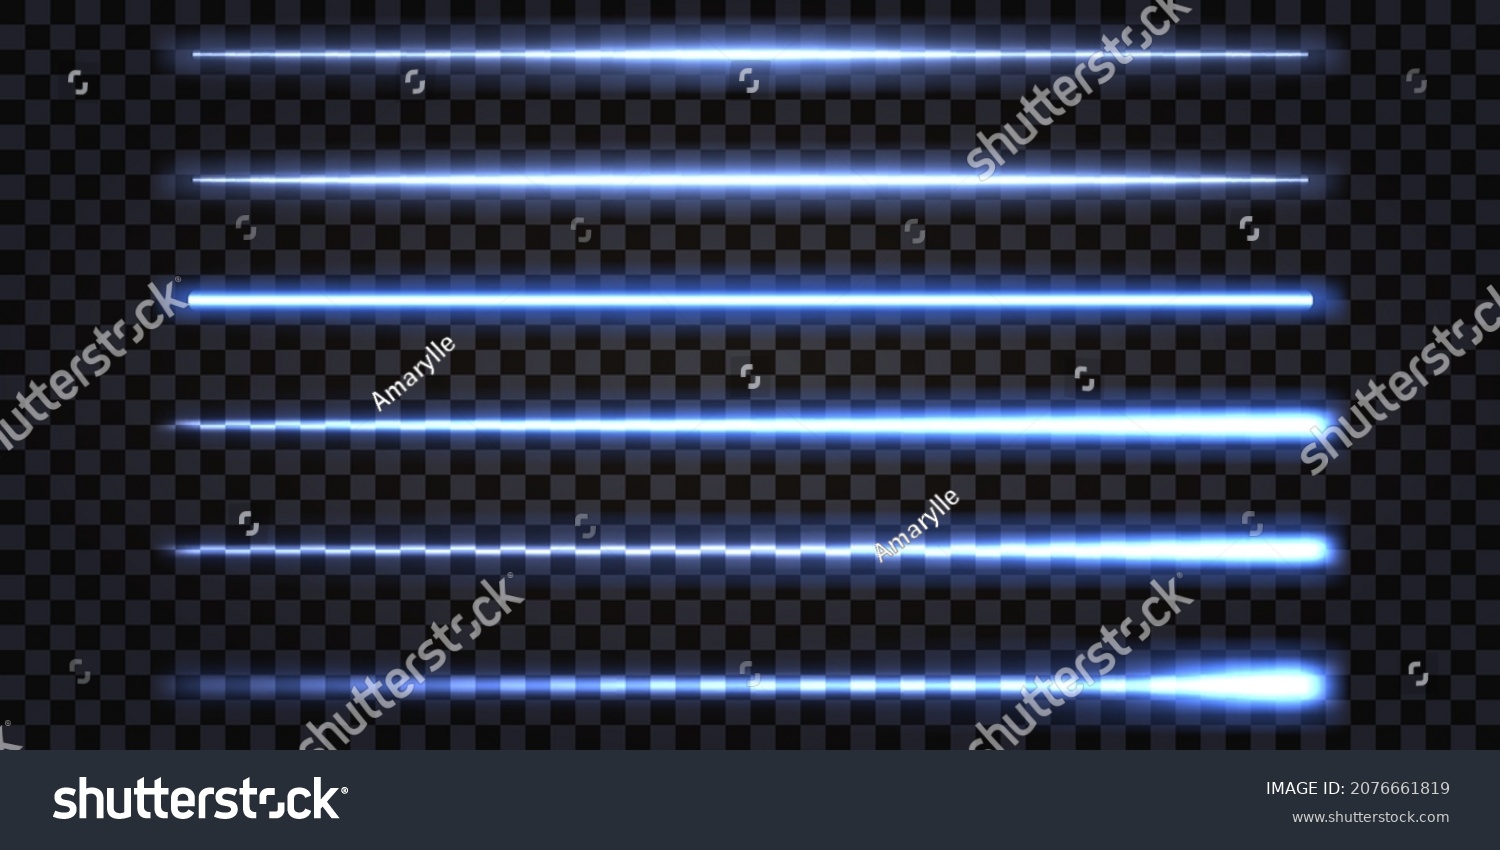 Blue neon glowing sticks, laser beams with electric light effect. Lightning thunder bolt. Set of straight shiny lines isolated on dark transparent background. Vector illustration #2076661819